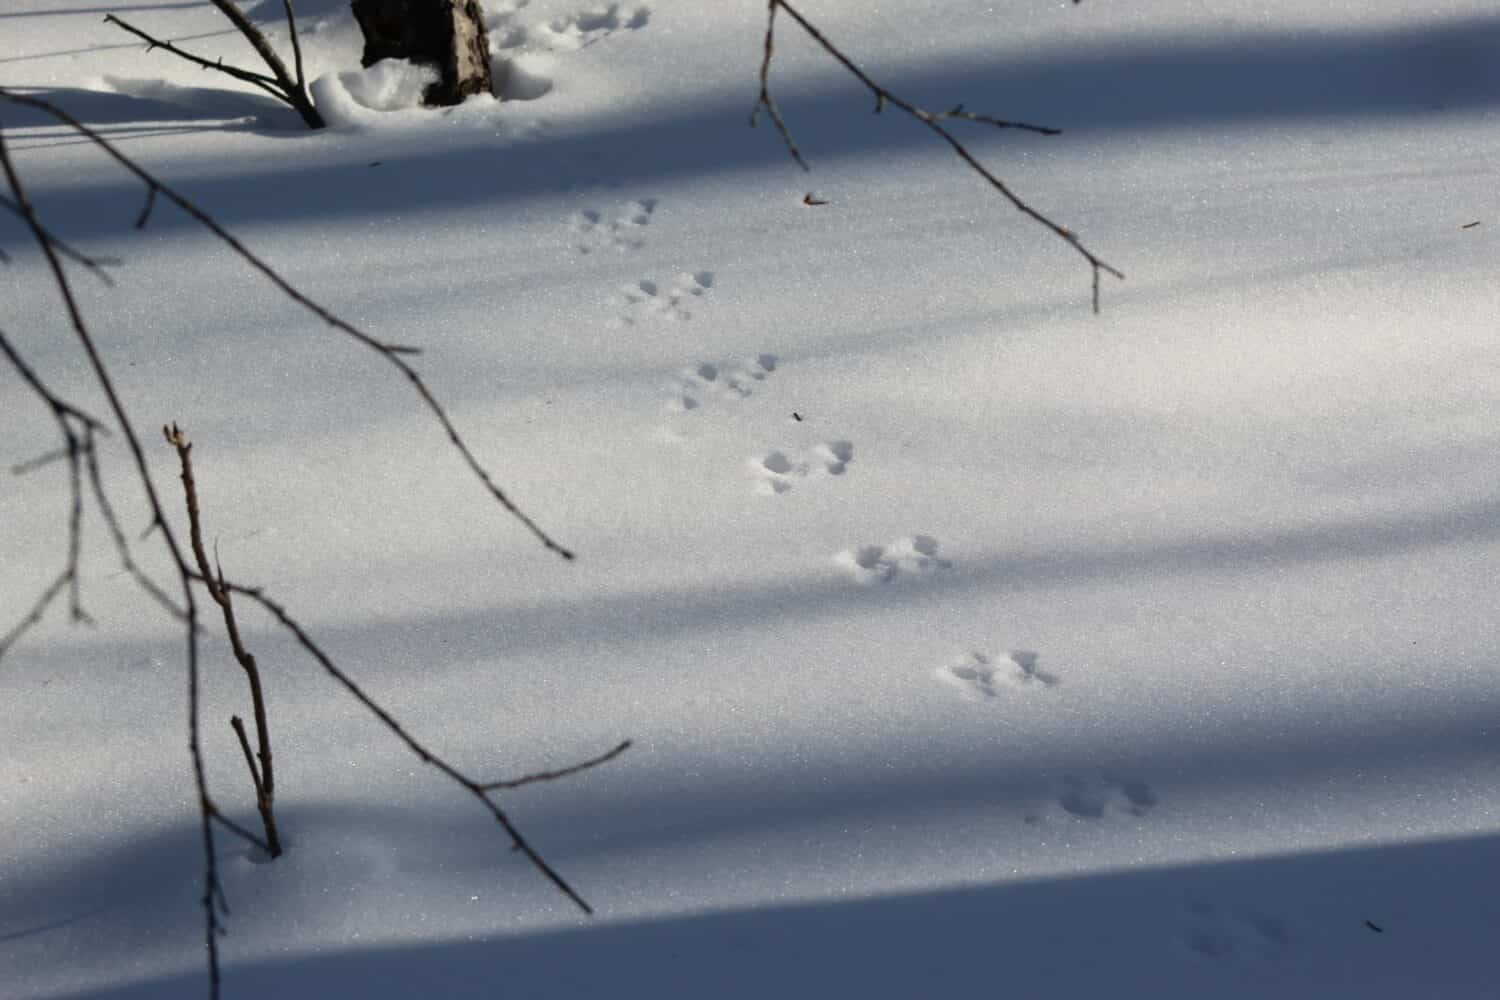 ermine tracks in the snow